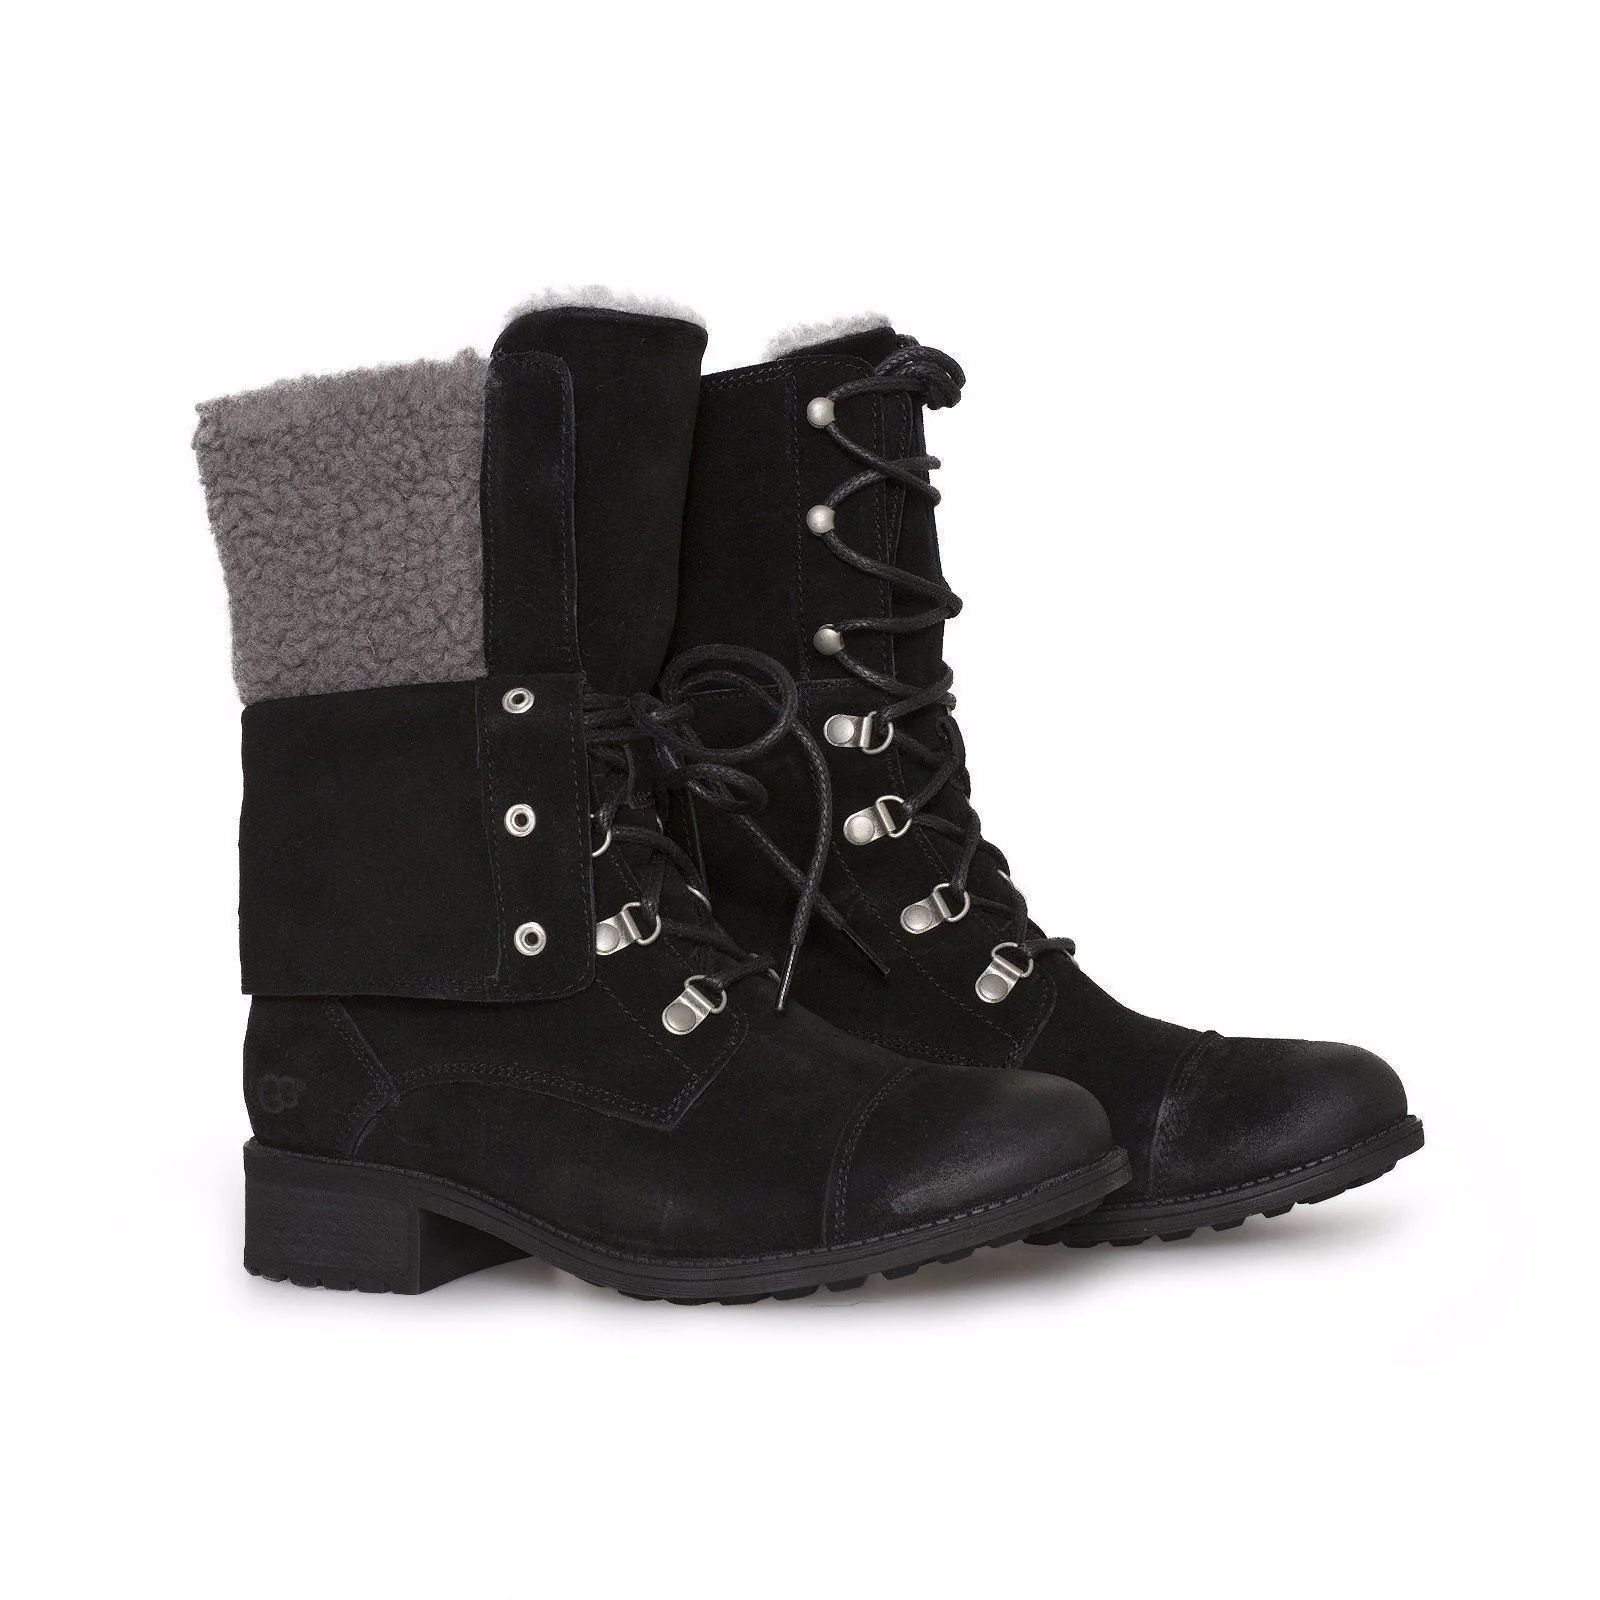 UGG Women's Black Suede Leather Gradin Wool Lace Up Fold-Down Combat Ankle Boots